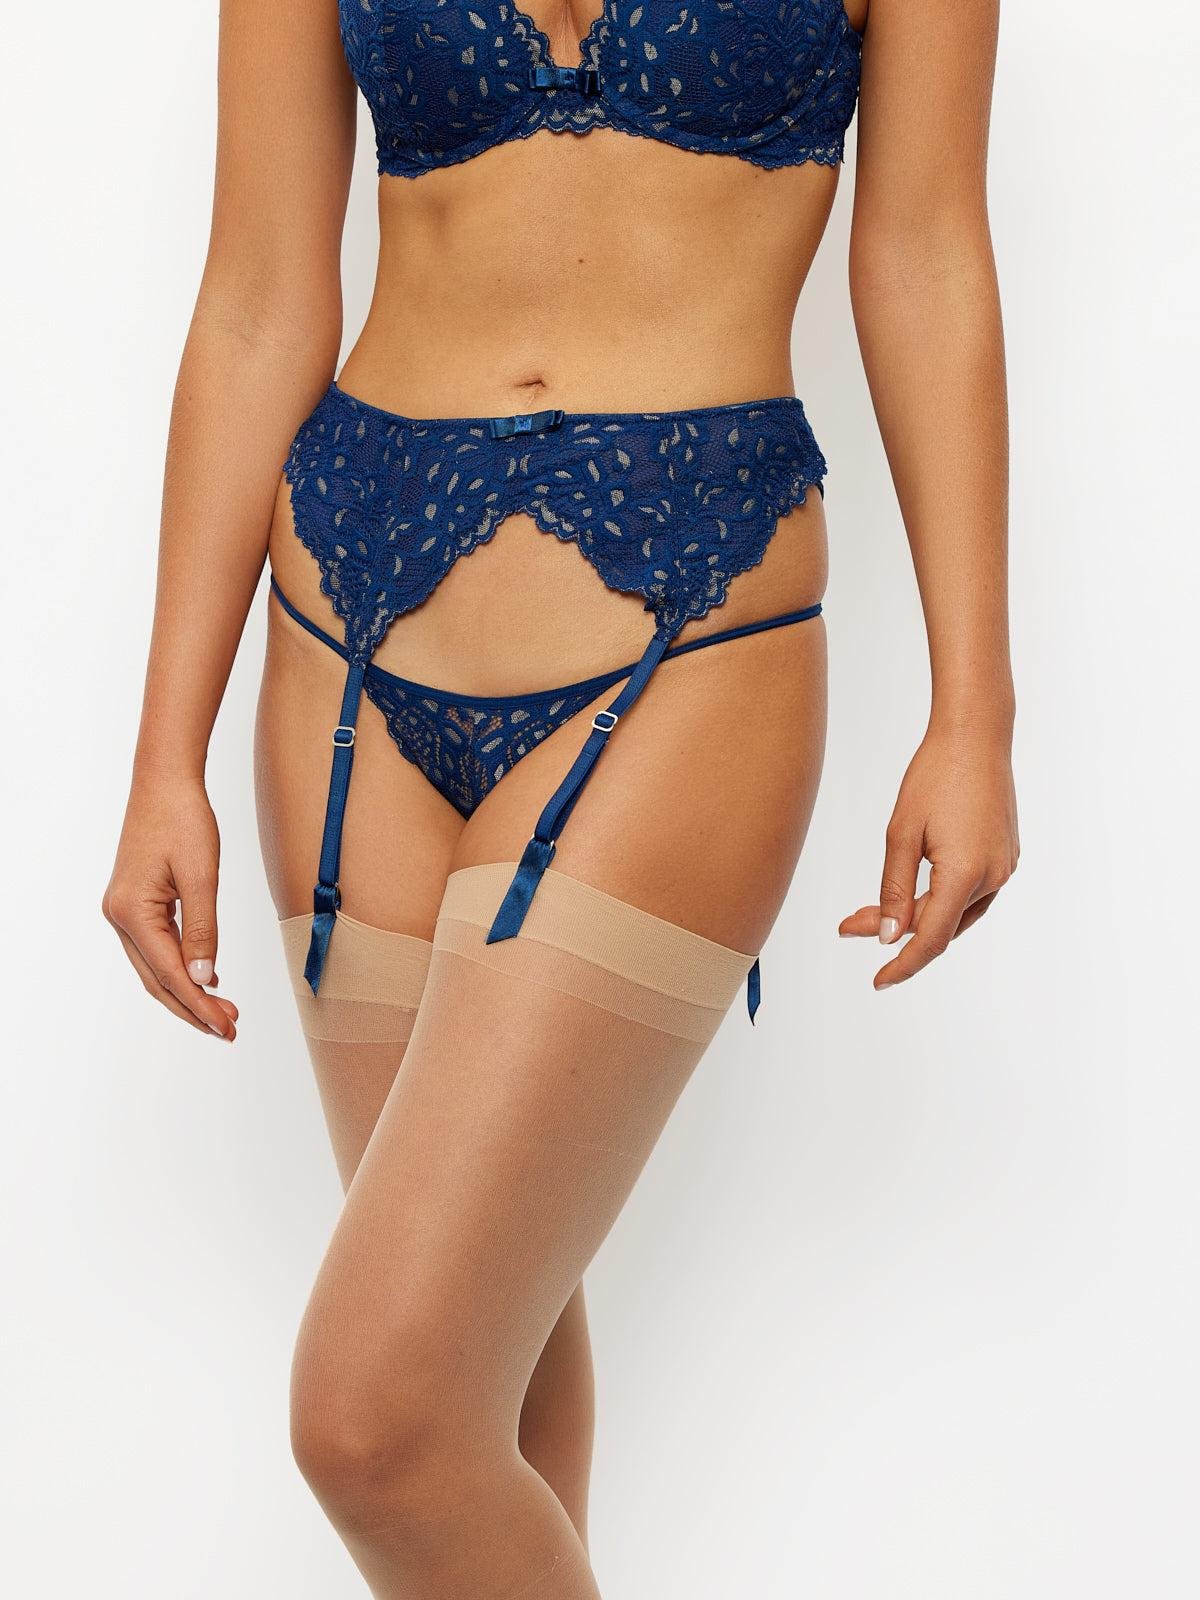 Jessica Lace Garter Belt in Estate Blue/Cameo Rose by FREDERICK'S OF HOLLYWOOD